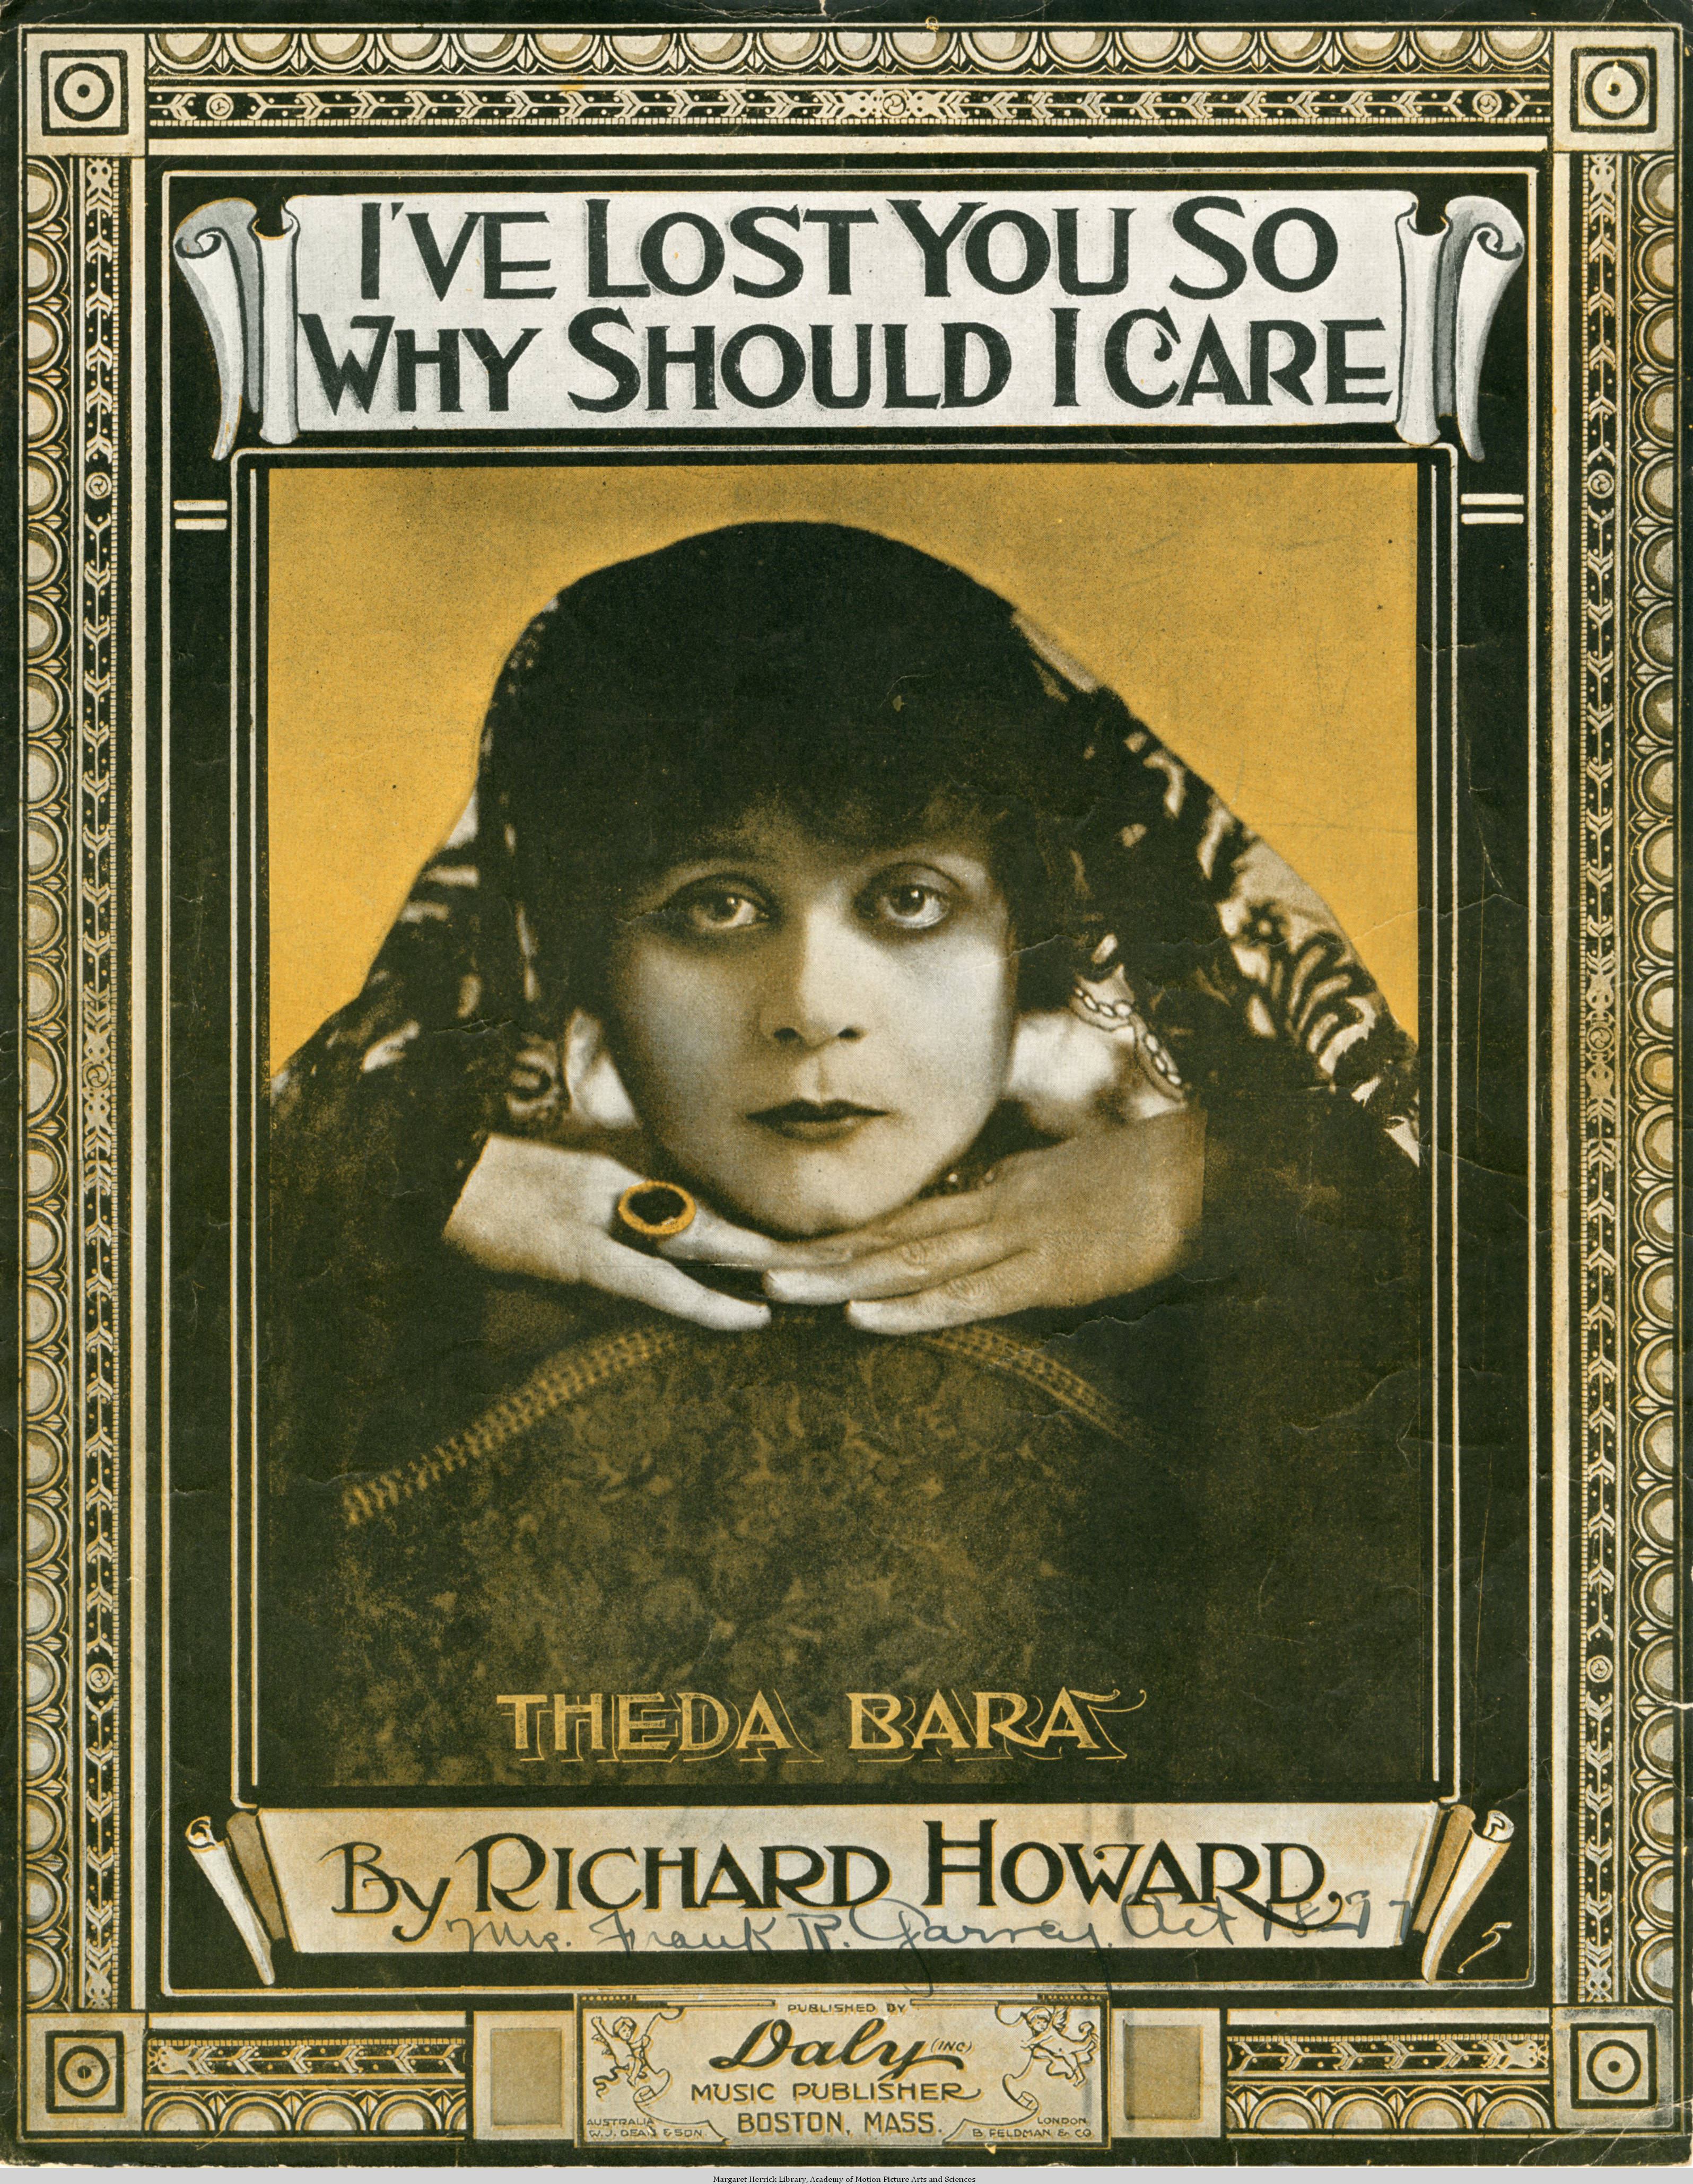 Sheet_music_cover_-_I'VE_LOST_YOU_SO_WHY_SHOULD_I_CARE_(variant)(1916).jpg